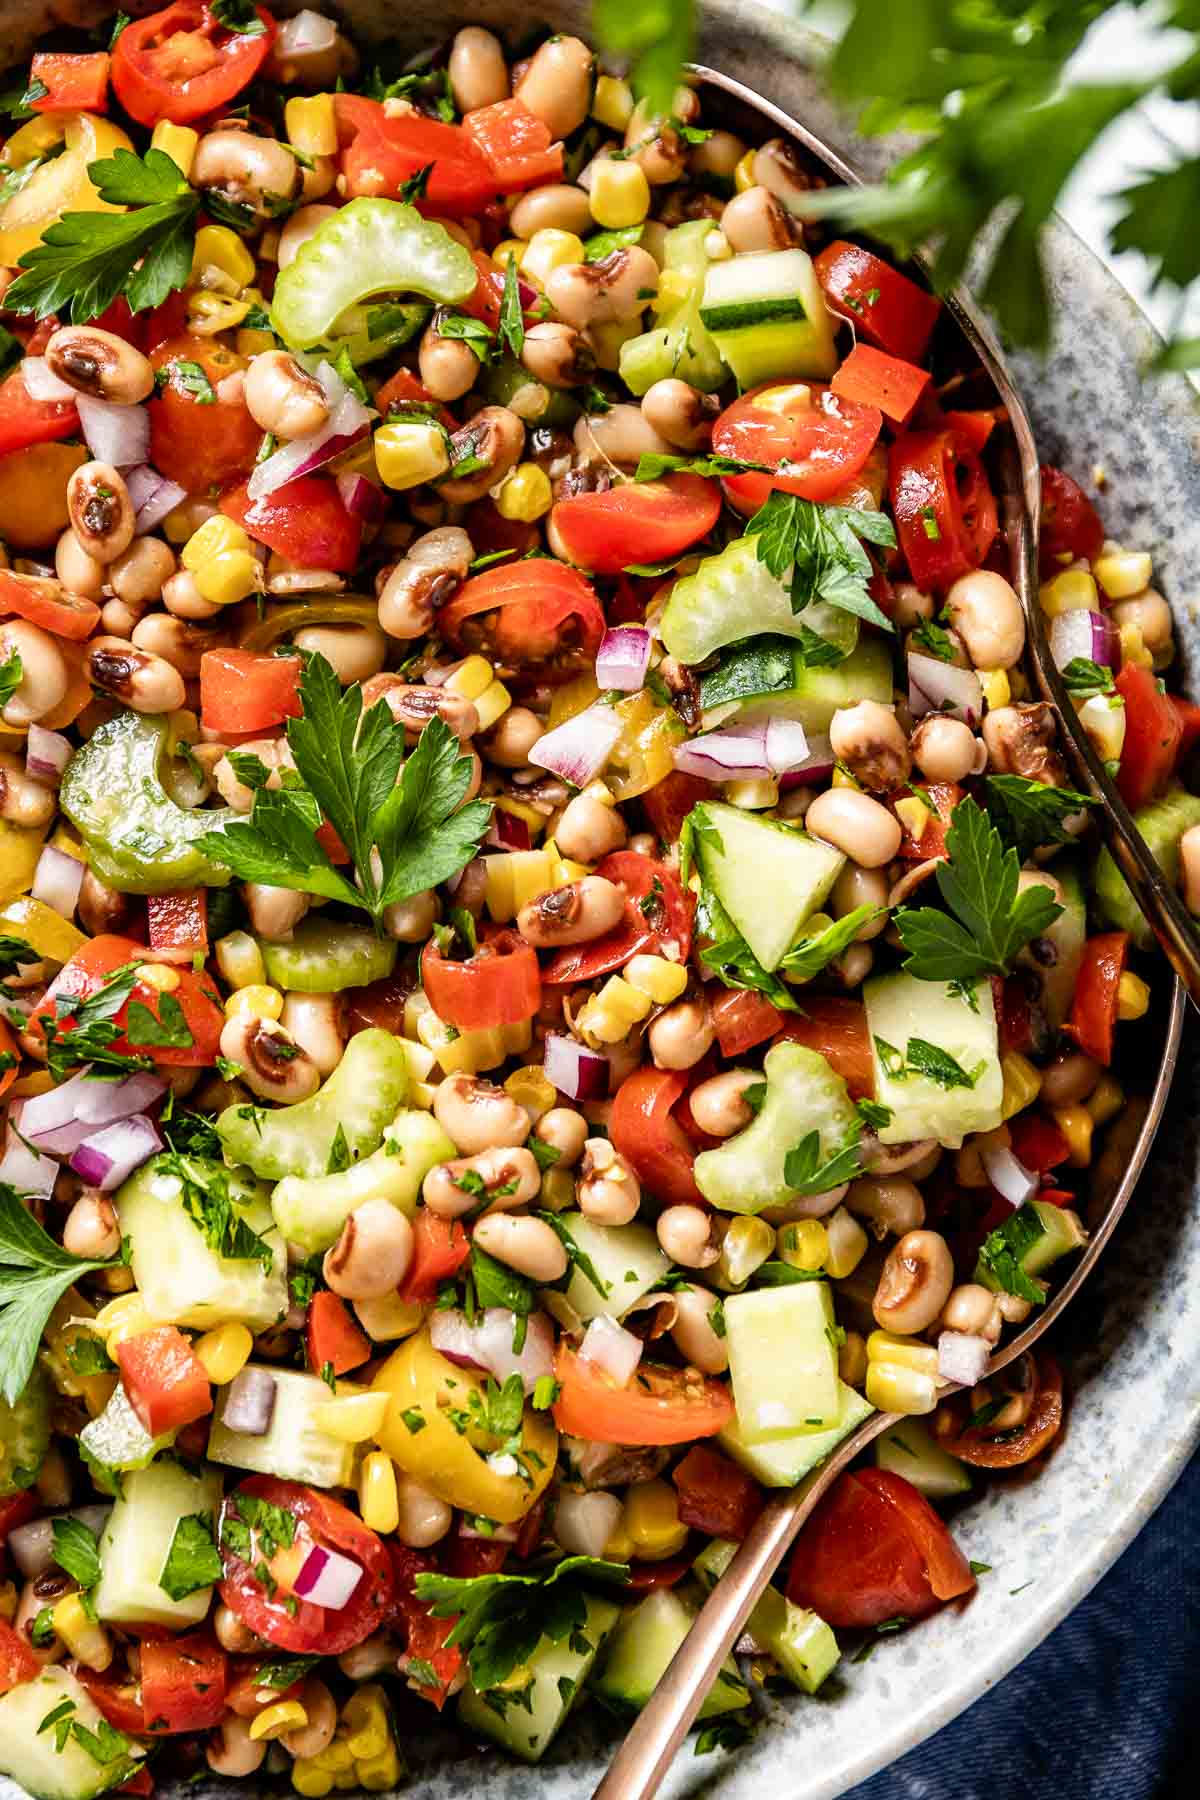 Lucky black eyed pea salad as a part of NYE party menu idea.